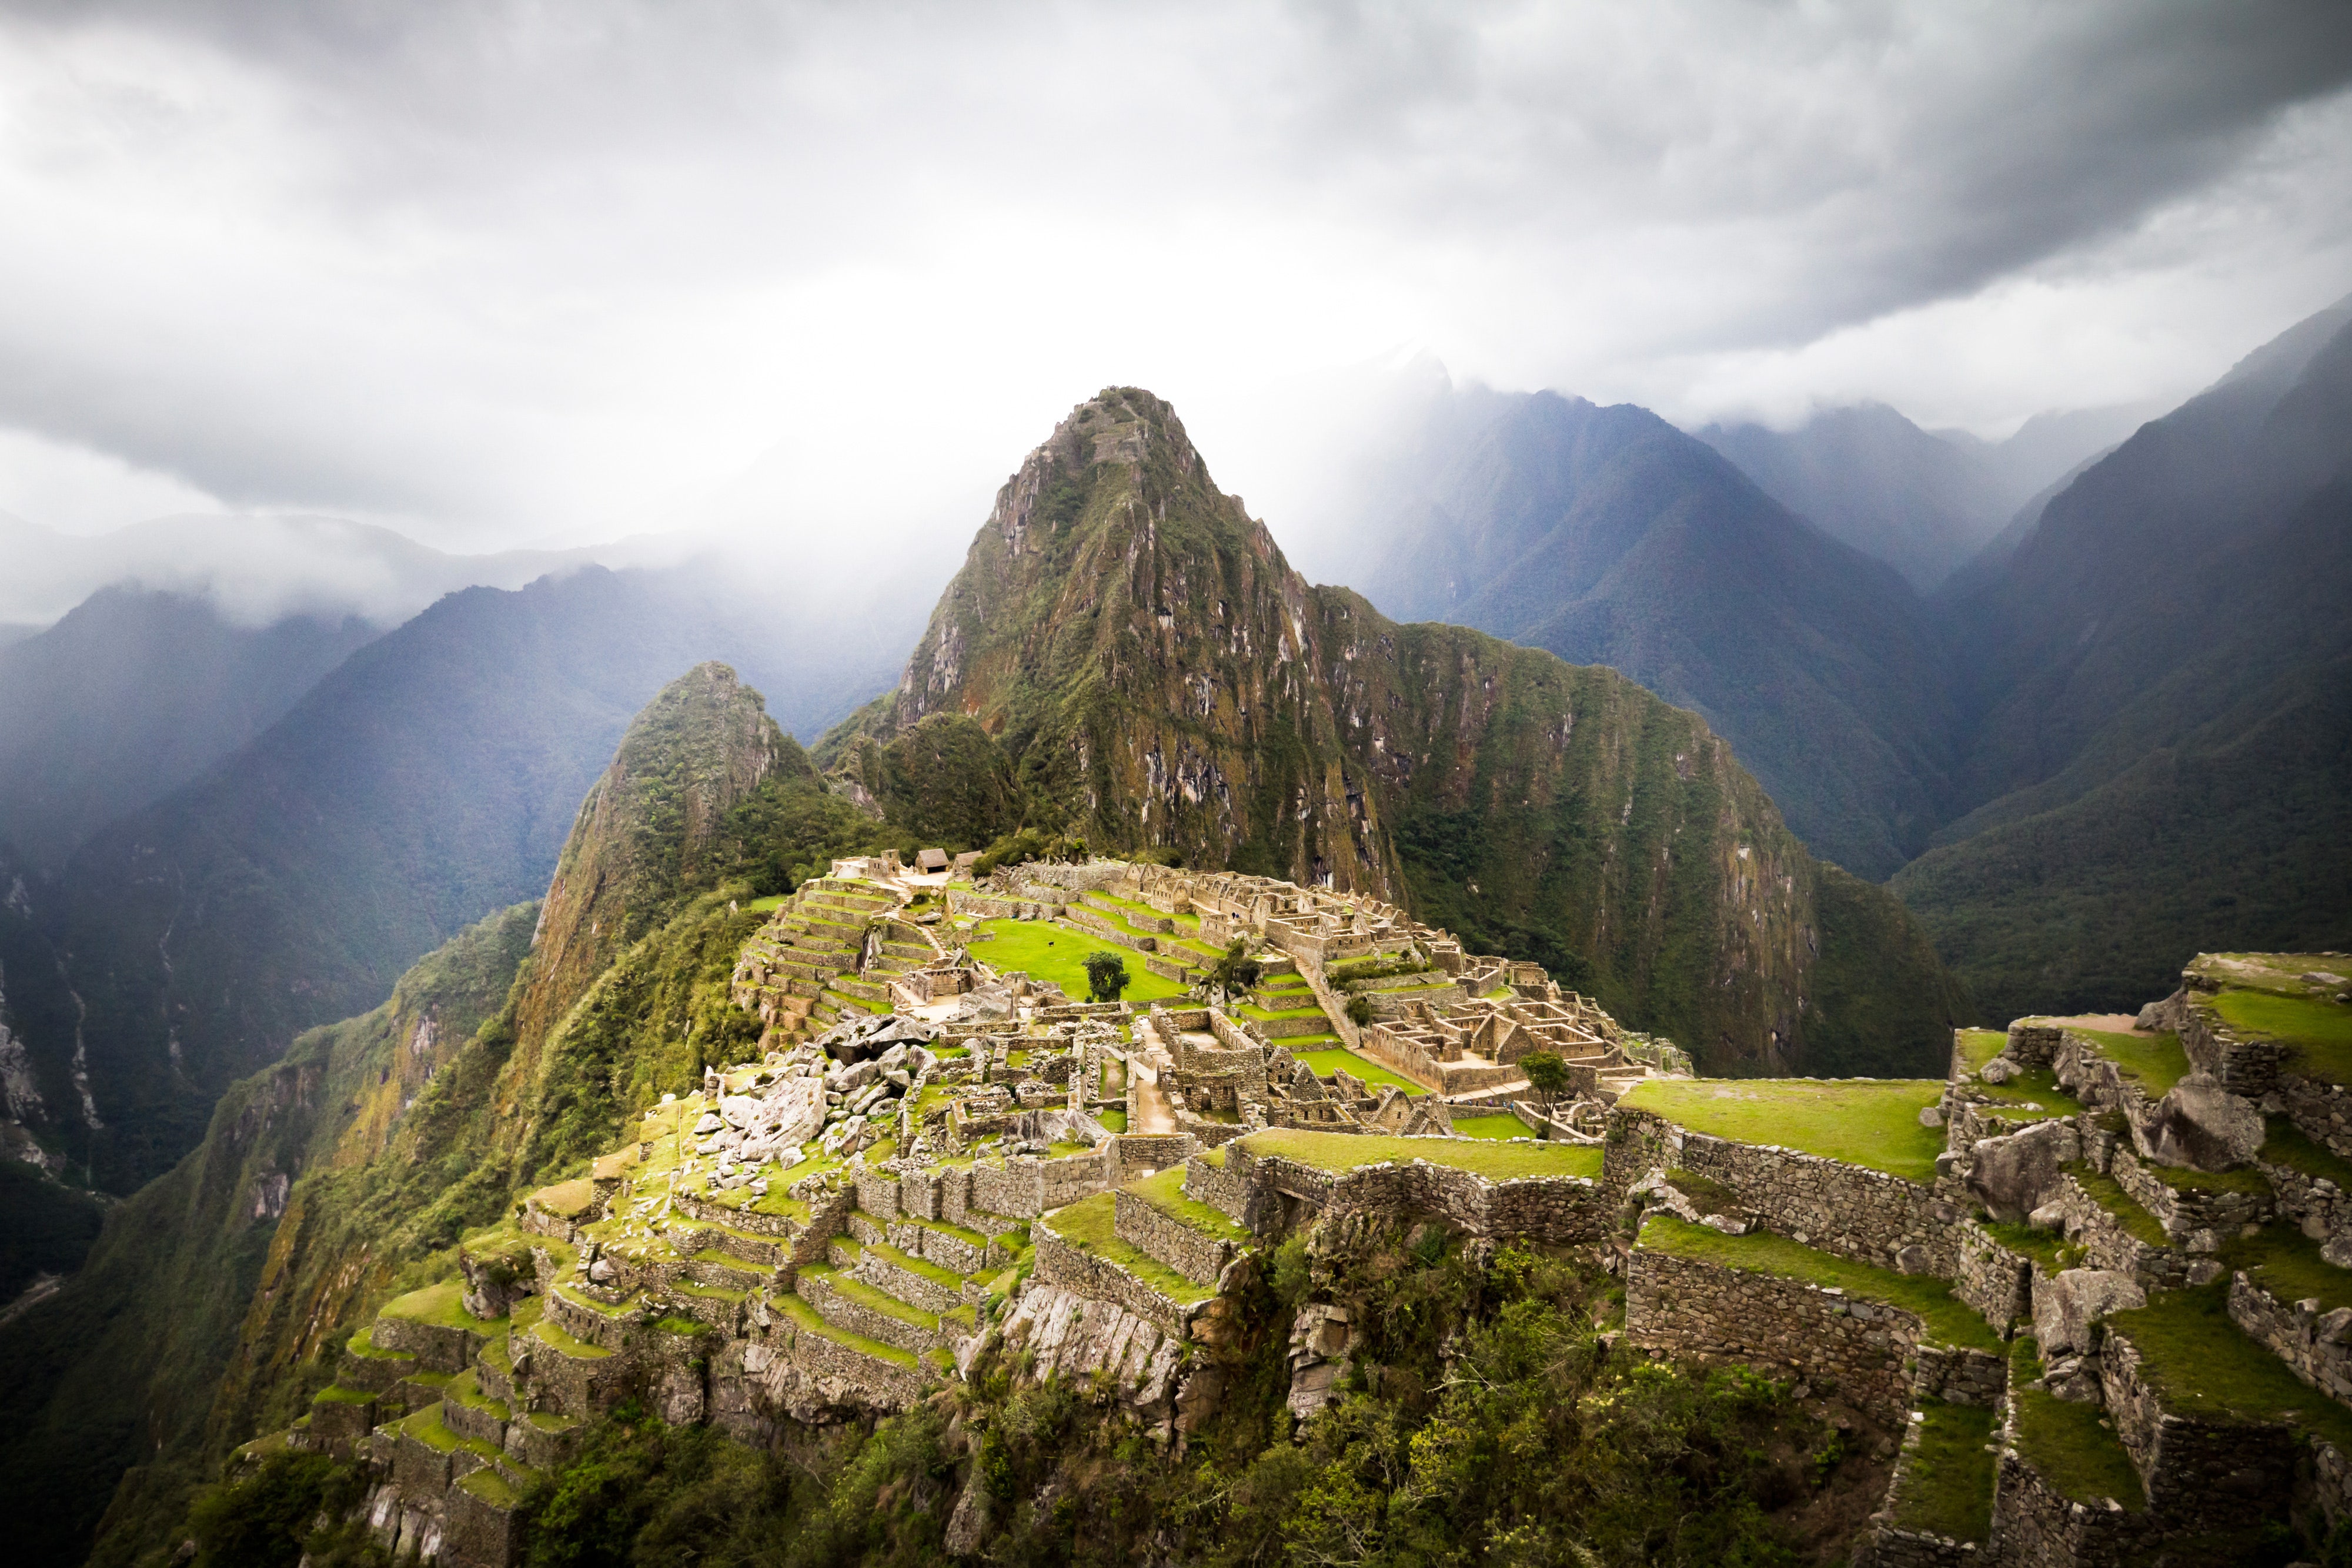 While the intricate stone ruins of Machu Picchu are the work of 15th-century Incans, the site’s <a href="https://www.cntraveler.com/gallery/the-most-beautiful-places-in-peru?mbid=synd_msn_rss&utm_source=msn&utm_medium=syndication">natural setting</a> makes it even more alluring. Perched atop the flattened peak of a mountain, the ancient Wonder of the World benefits from the famous backdrop of Huayna Picchu, lush green surfaces, and a barrier of Andean peaks that, despite the landmark’s fame, makes you feel like you've stumbled upon a secret.